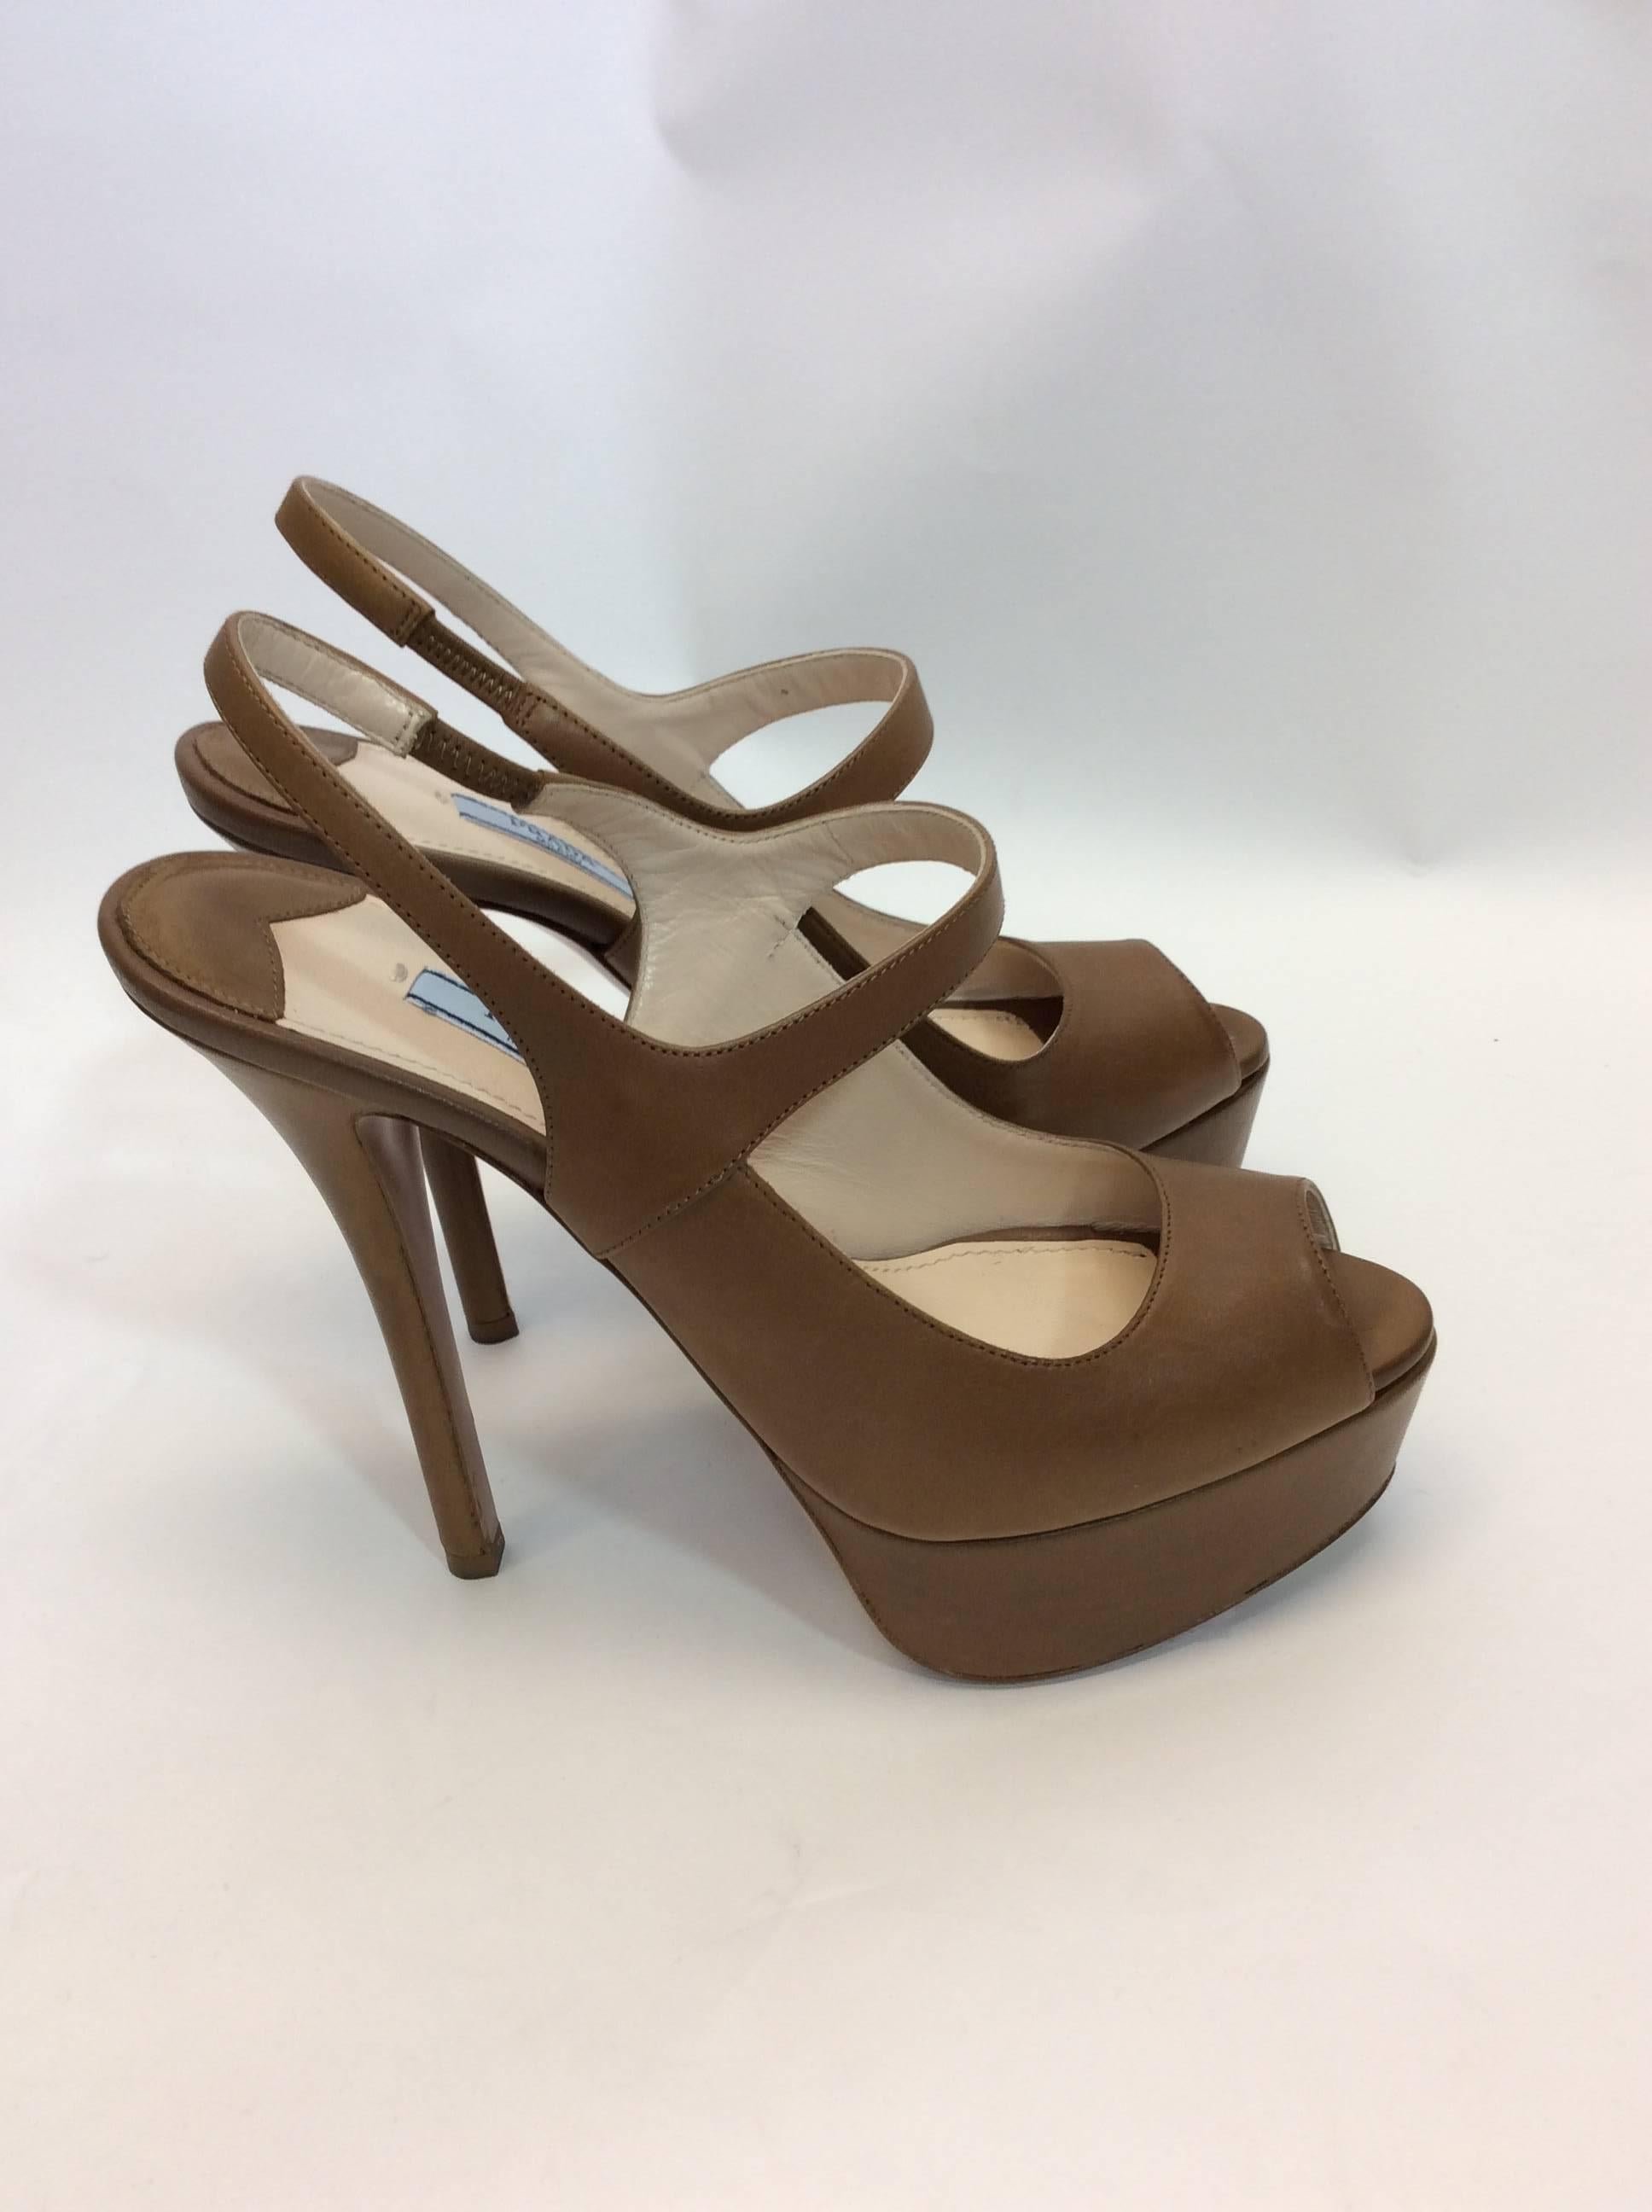 Prada Leather Peep Toe Platform Stiletto
2 inch platform
5.5 inch heel
Peep toe style
Comes with box
$450 
Made in Italy
Size 38.5